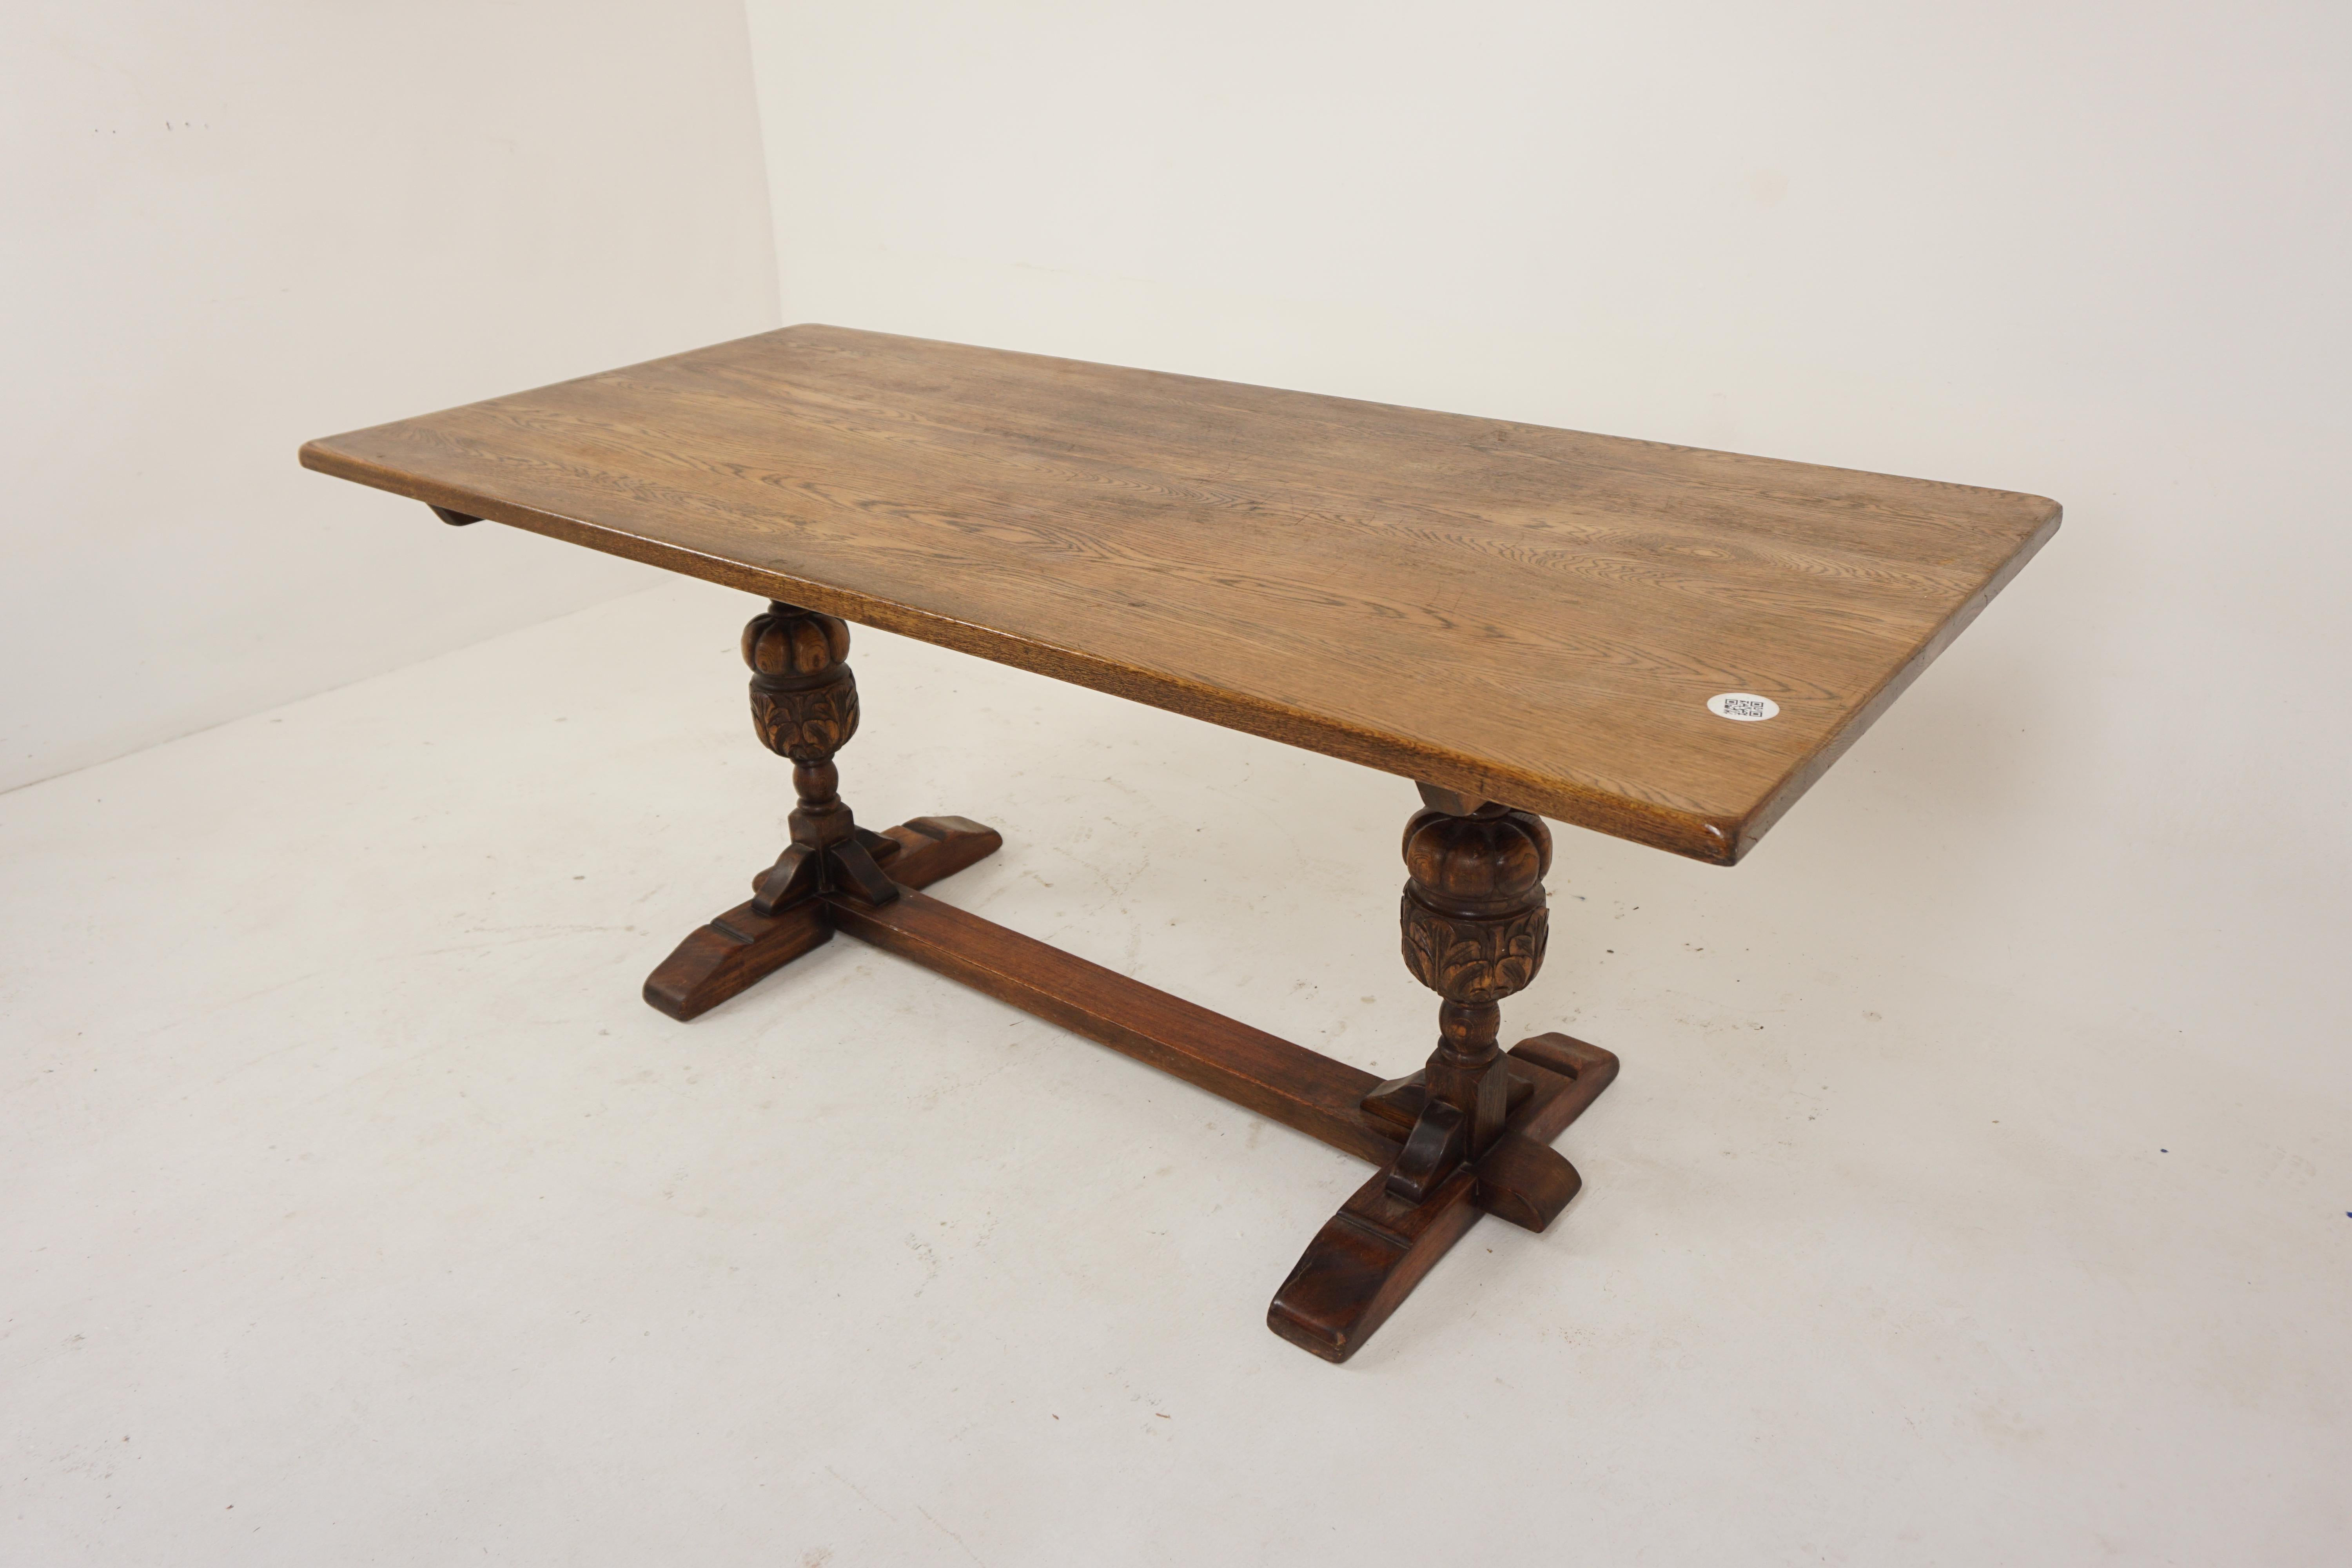 Vintage Oak Refectory, Farm House dining table, Scotland 1920, H719

Scotland 1920
Solid Oak
Original Finish
Rectangular solid oak top
Above a pair of carved bulbous supports
All united by a thick oak stretchers
Wonderful quality and in very